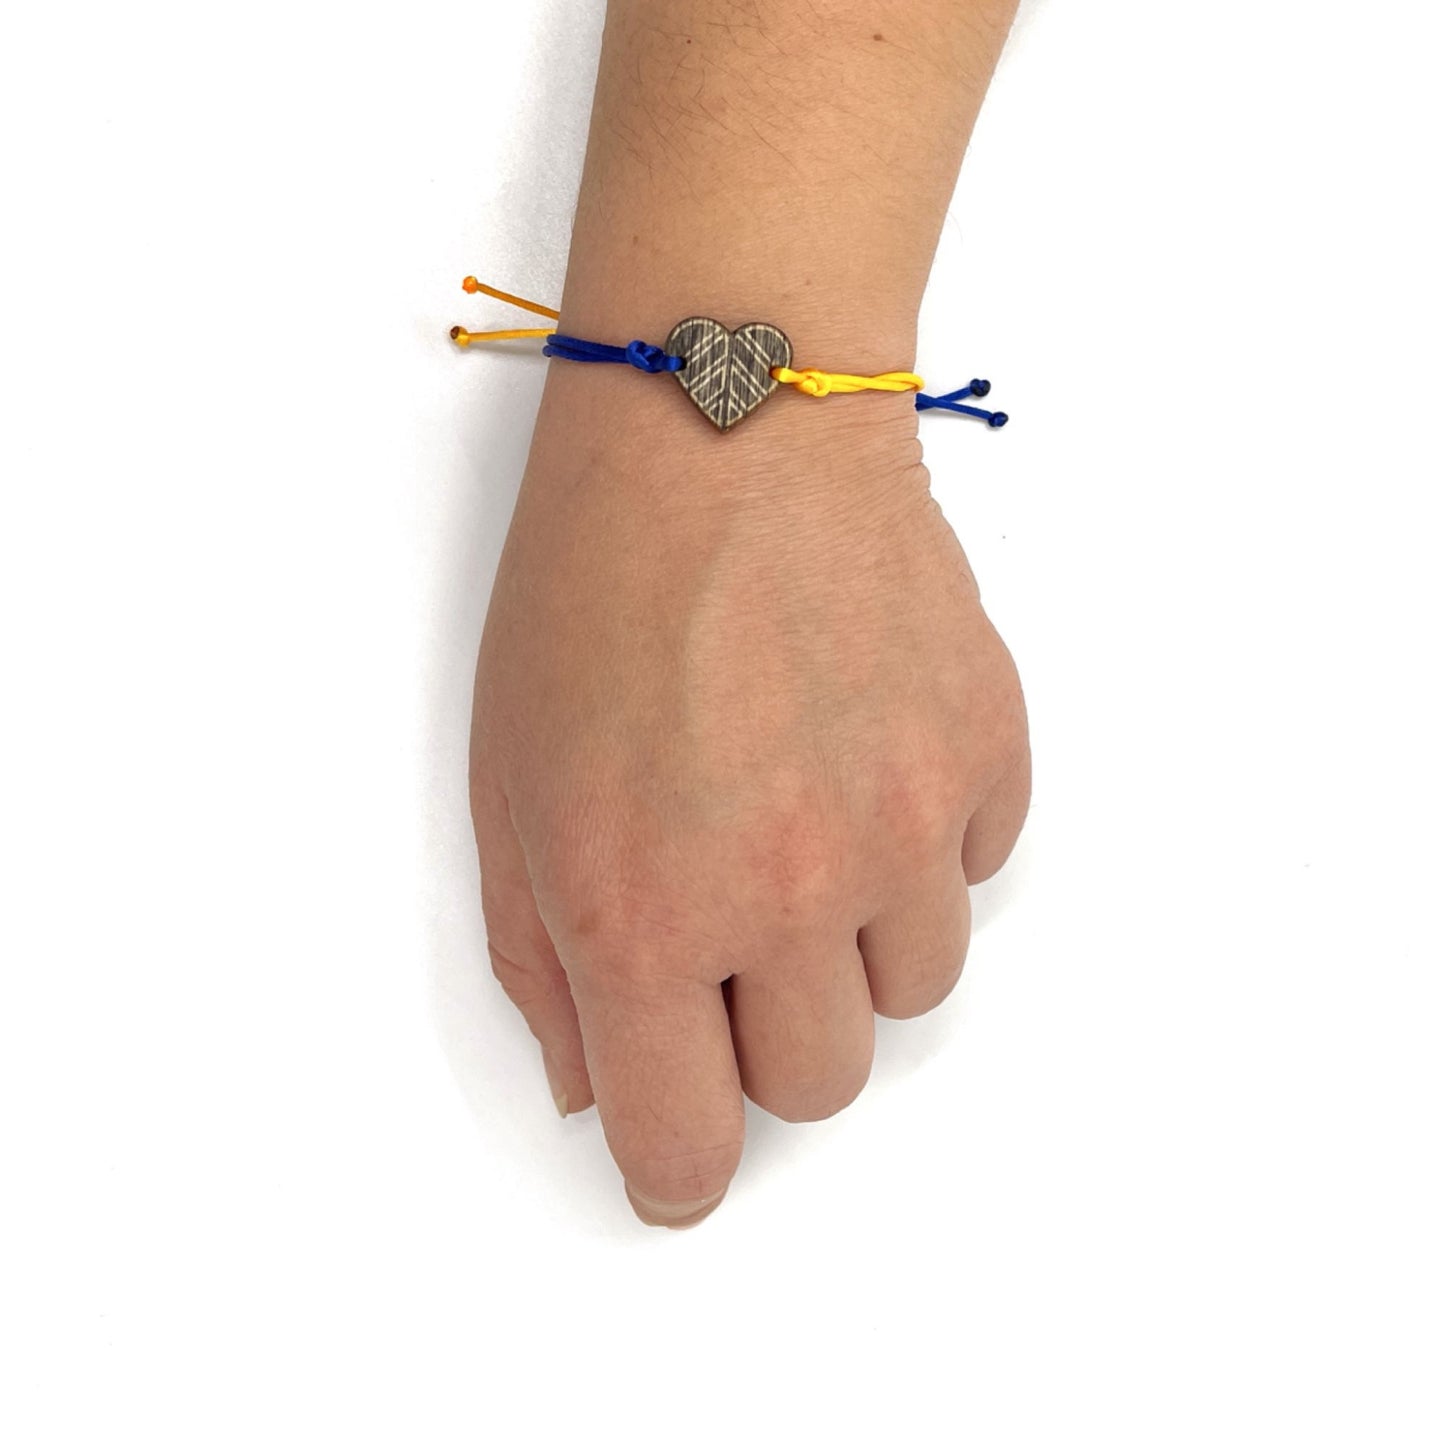 A hand adorned with the colorful bracelet 'Peace for Ukraine.' The hand is against a white background